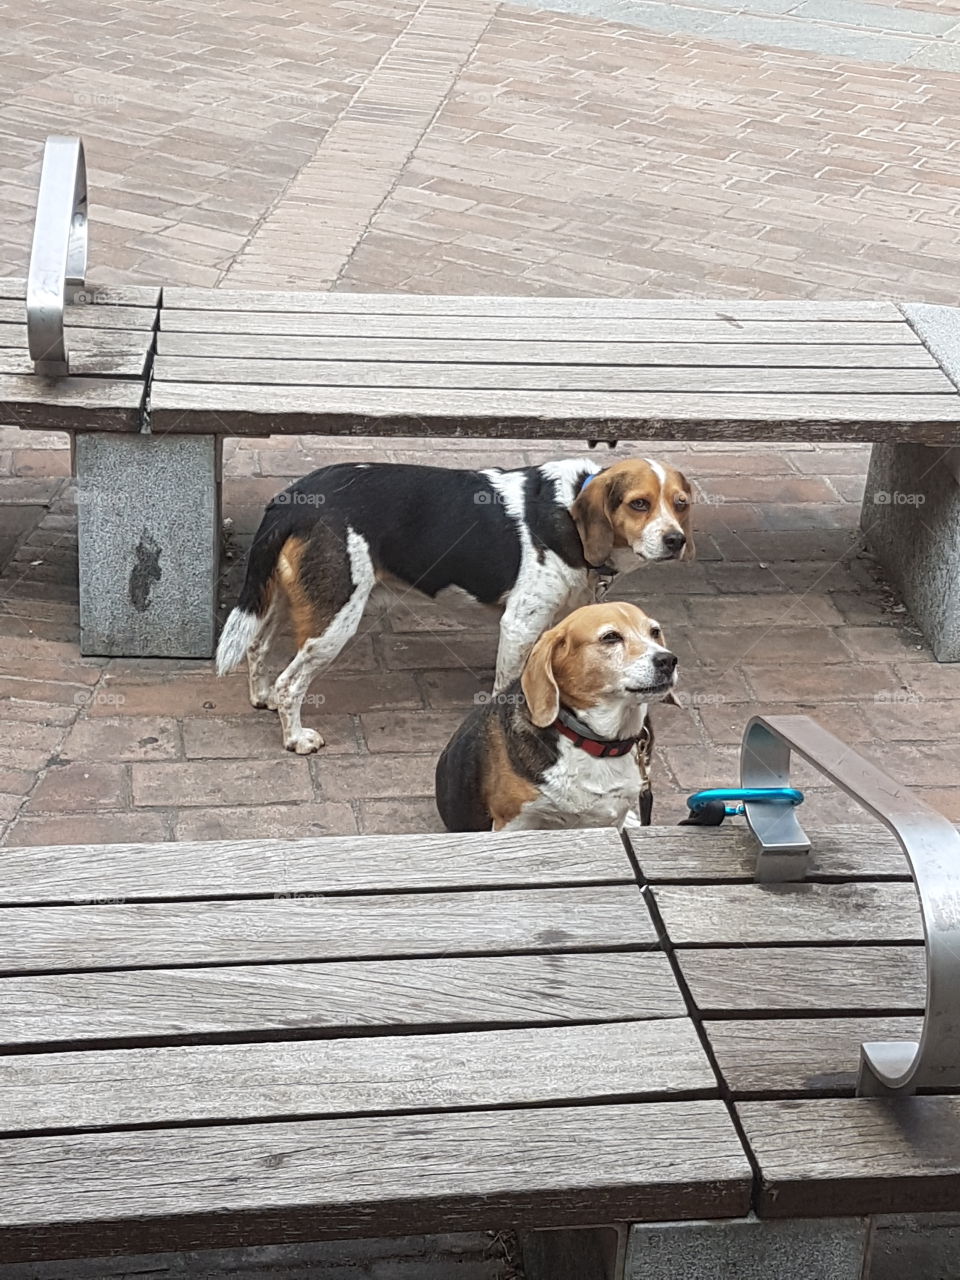 Two beagle dogs waiting for their master near wood benches